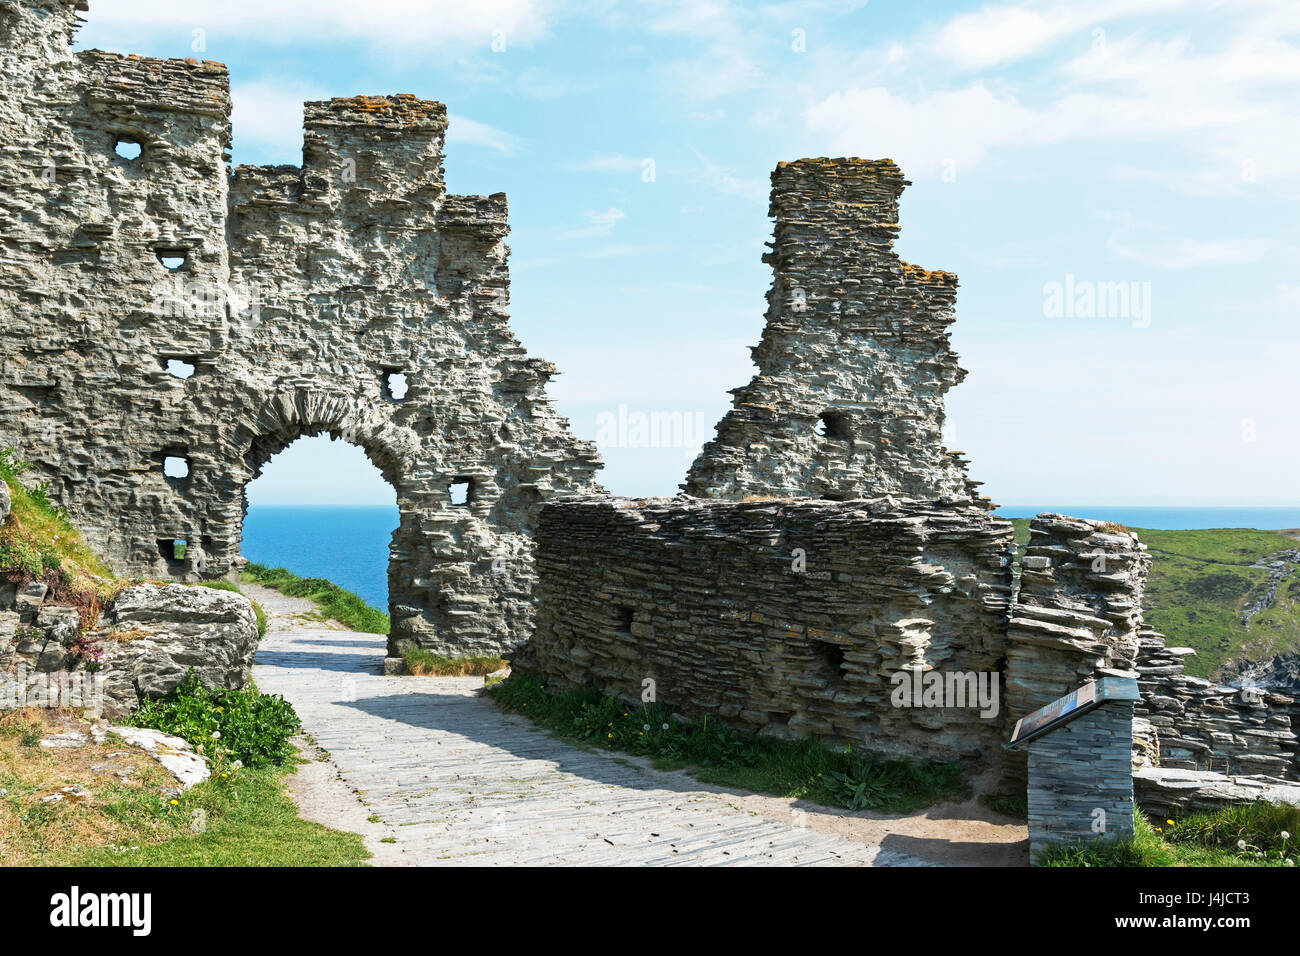 Remains of walls at Tintagel castle in Cornwall, England, Britain, UK. Stock Photo